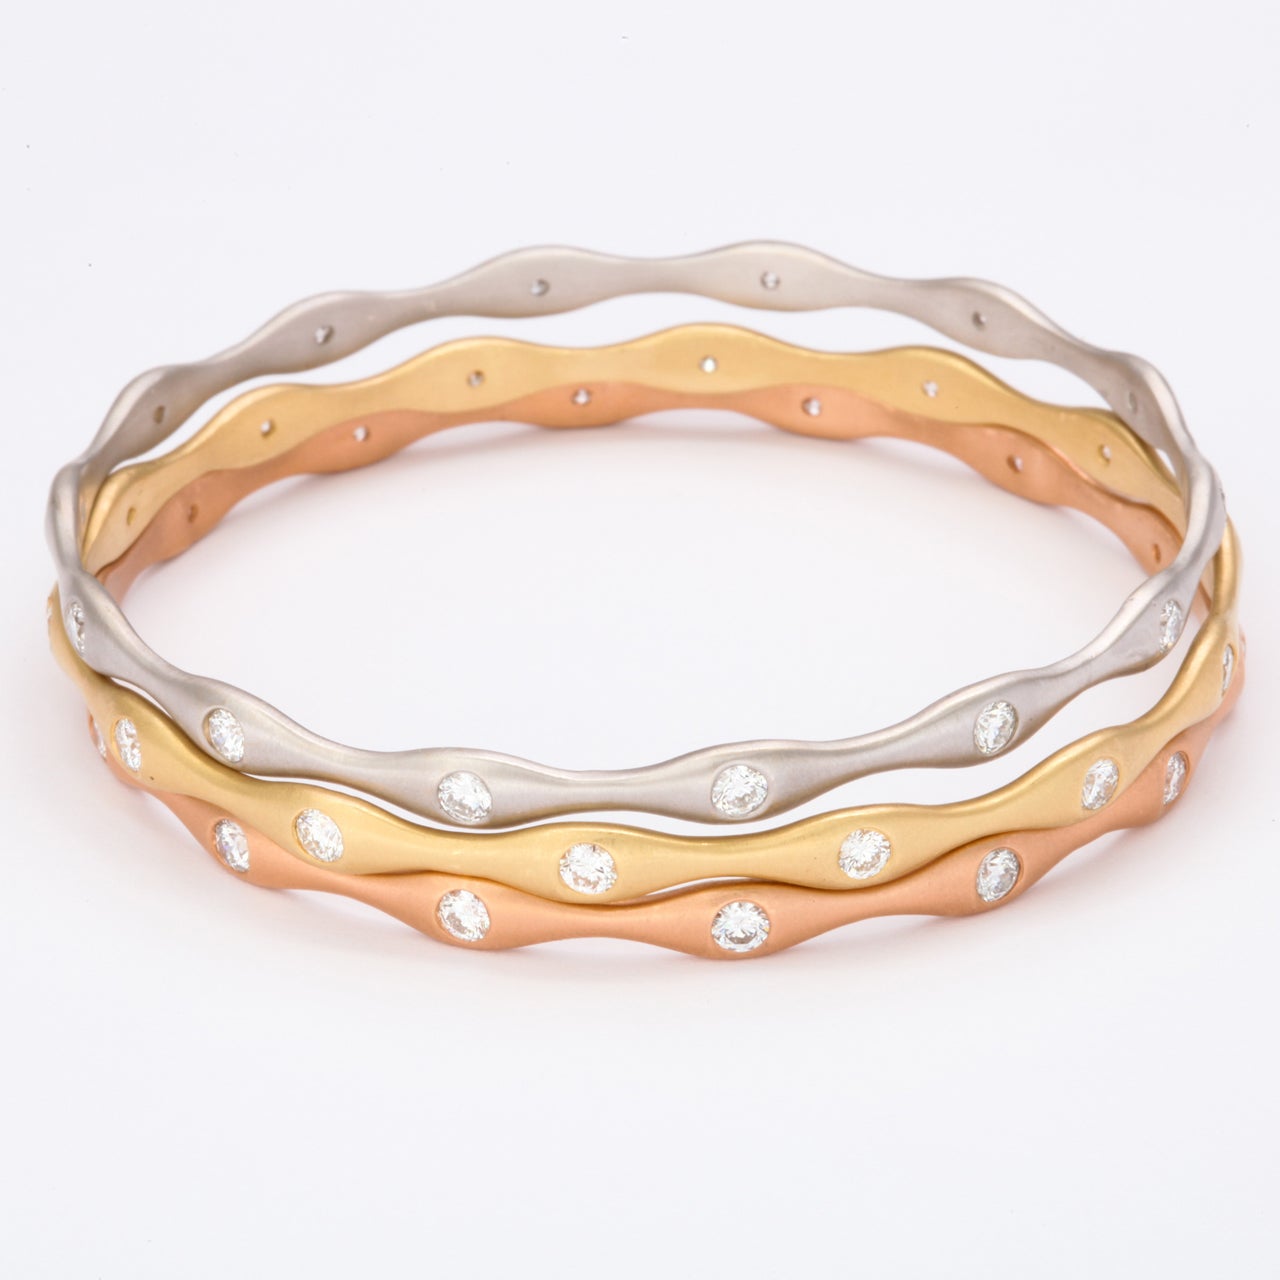 Gorgeous set of 18k white, yellow and rose gold bangles. Each bangle features 14 round diamonds. 
Rose-1.46 Carats
White-1.39 Carats
Yellow-1.48 Carats

Can be sold separately.